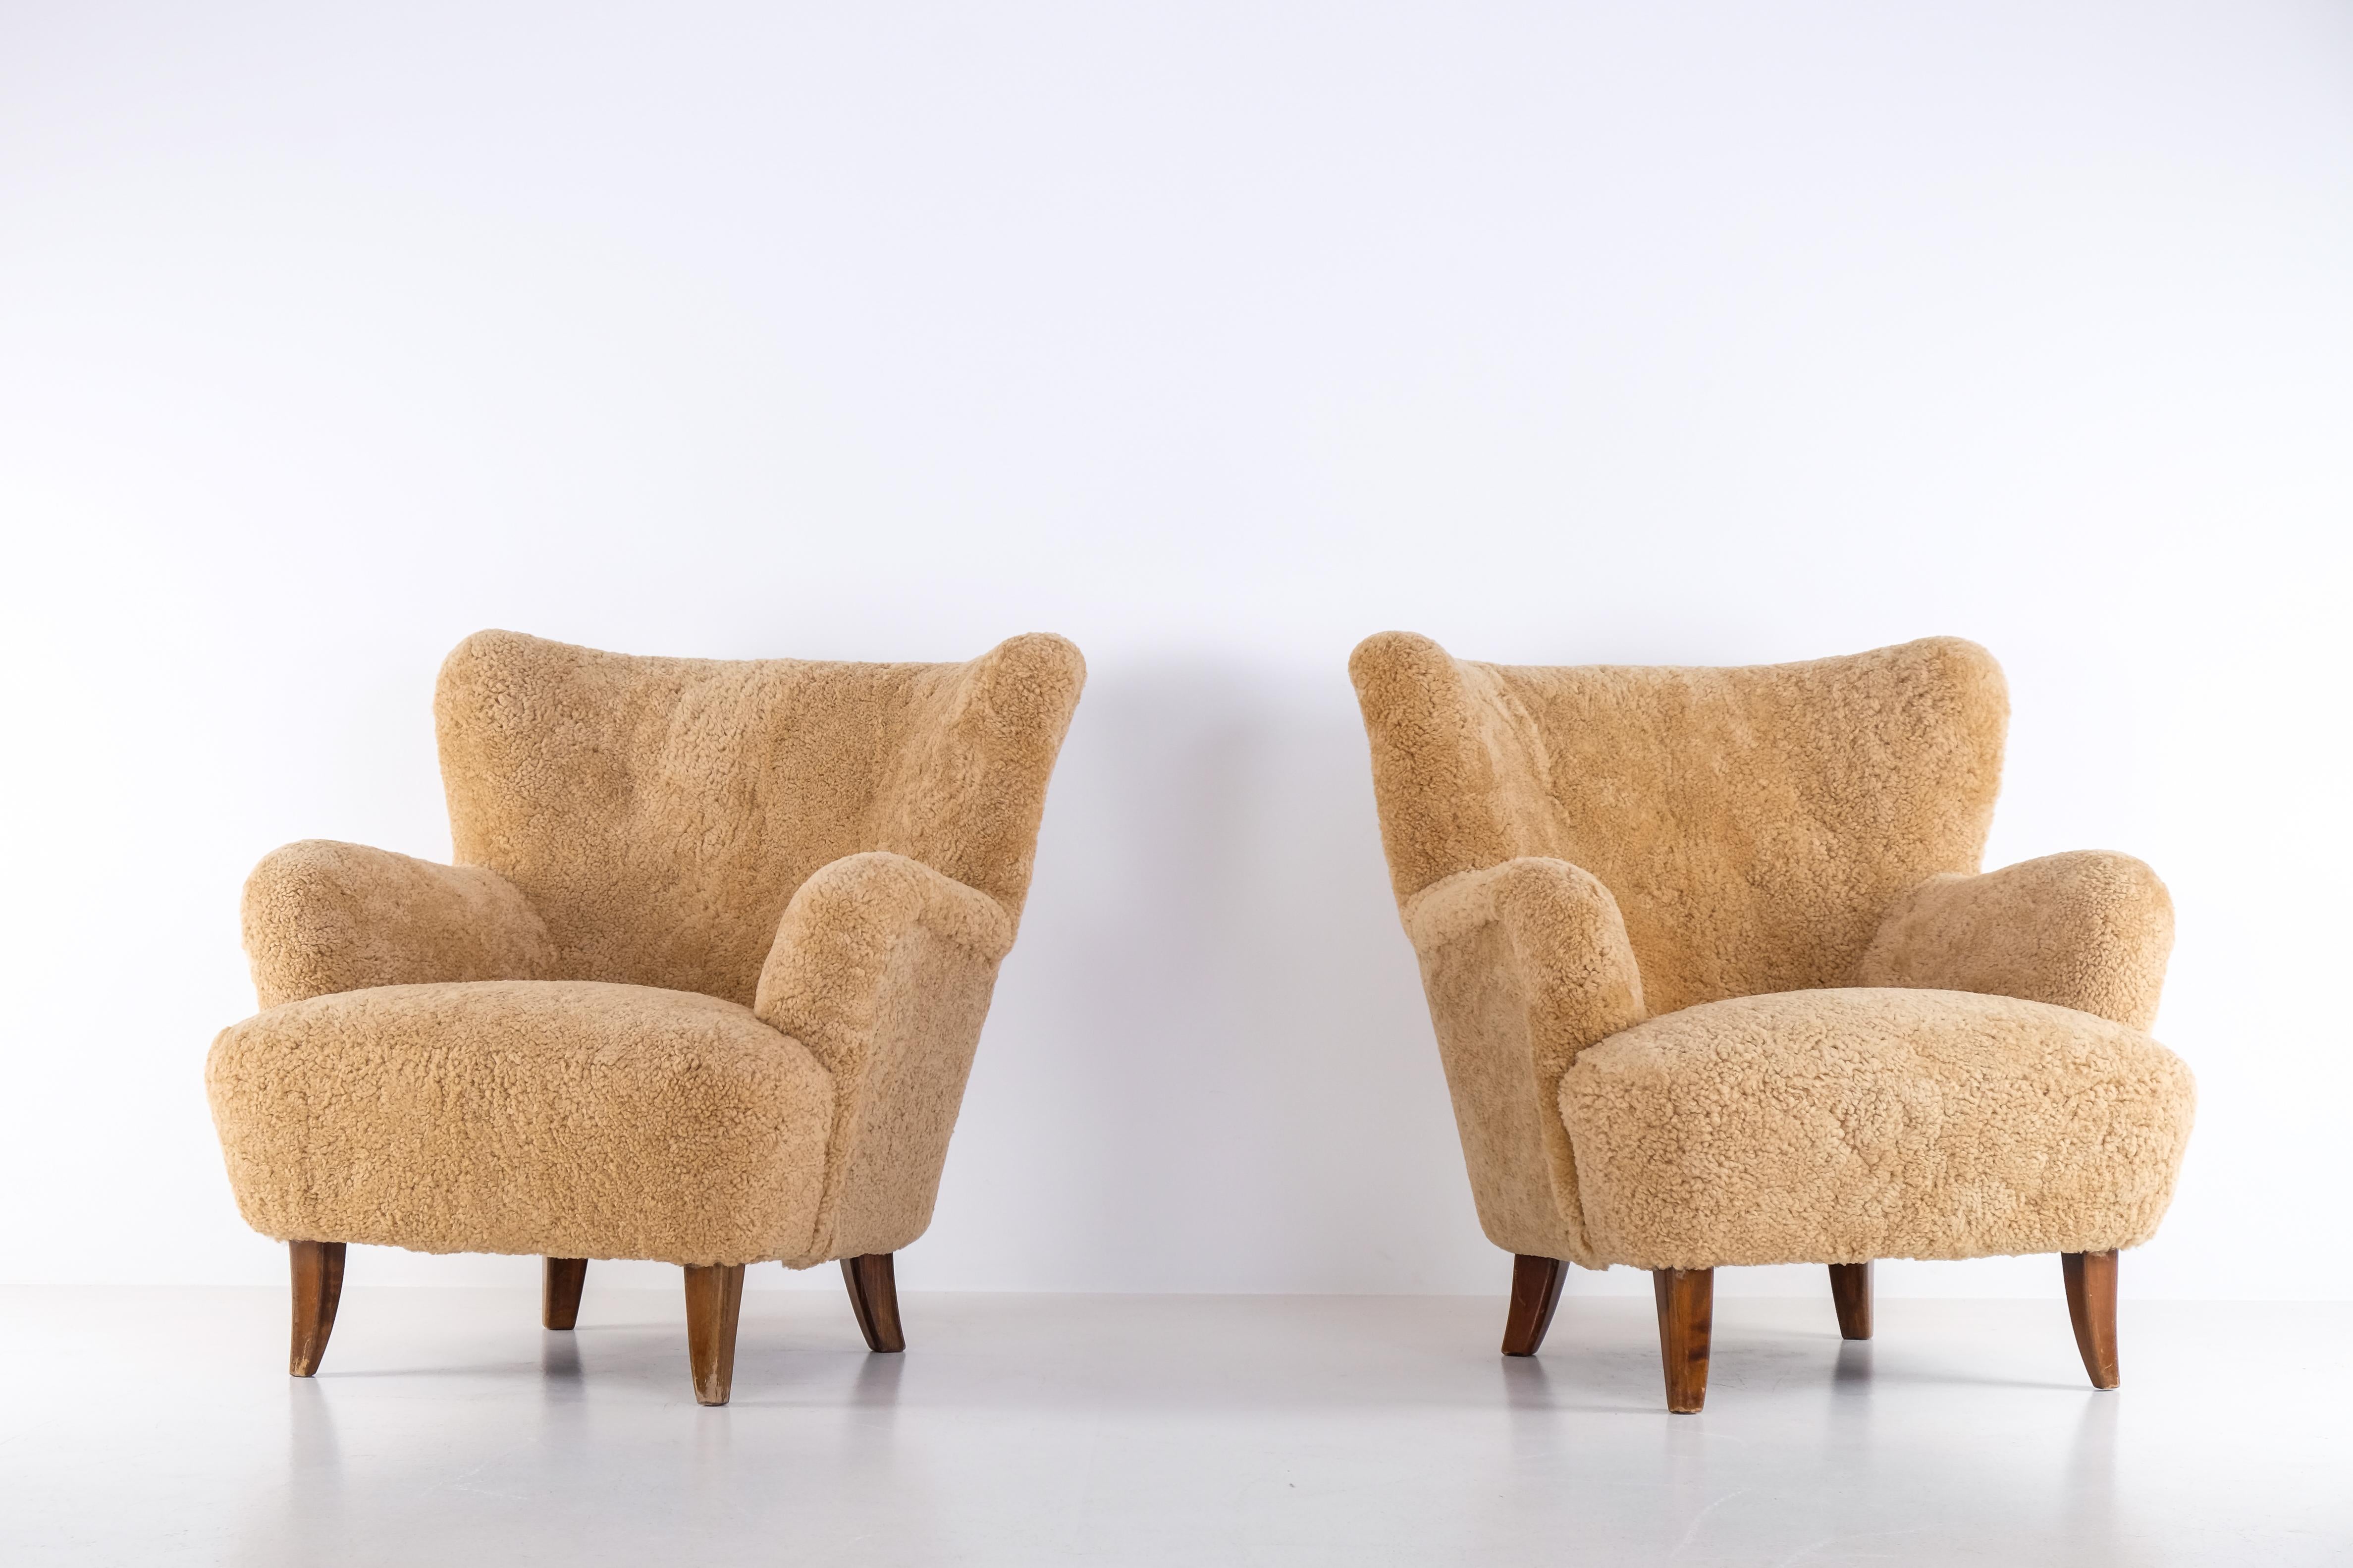 Pair of 'Laila' Armchair in sheepskin by Ilmari Lappalainen, Finland, 1950s For Sale 1